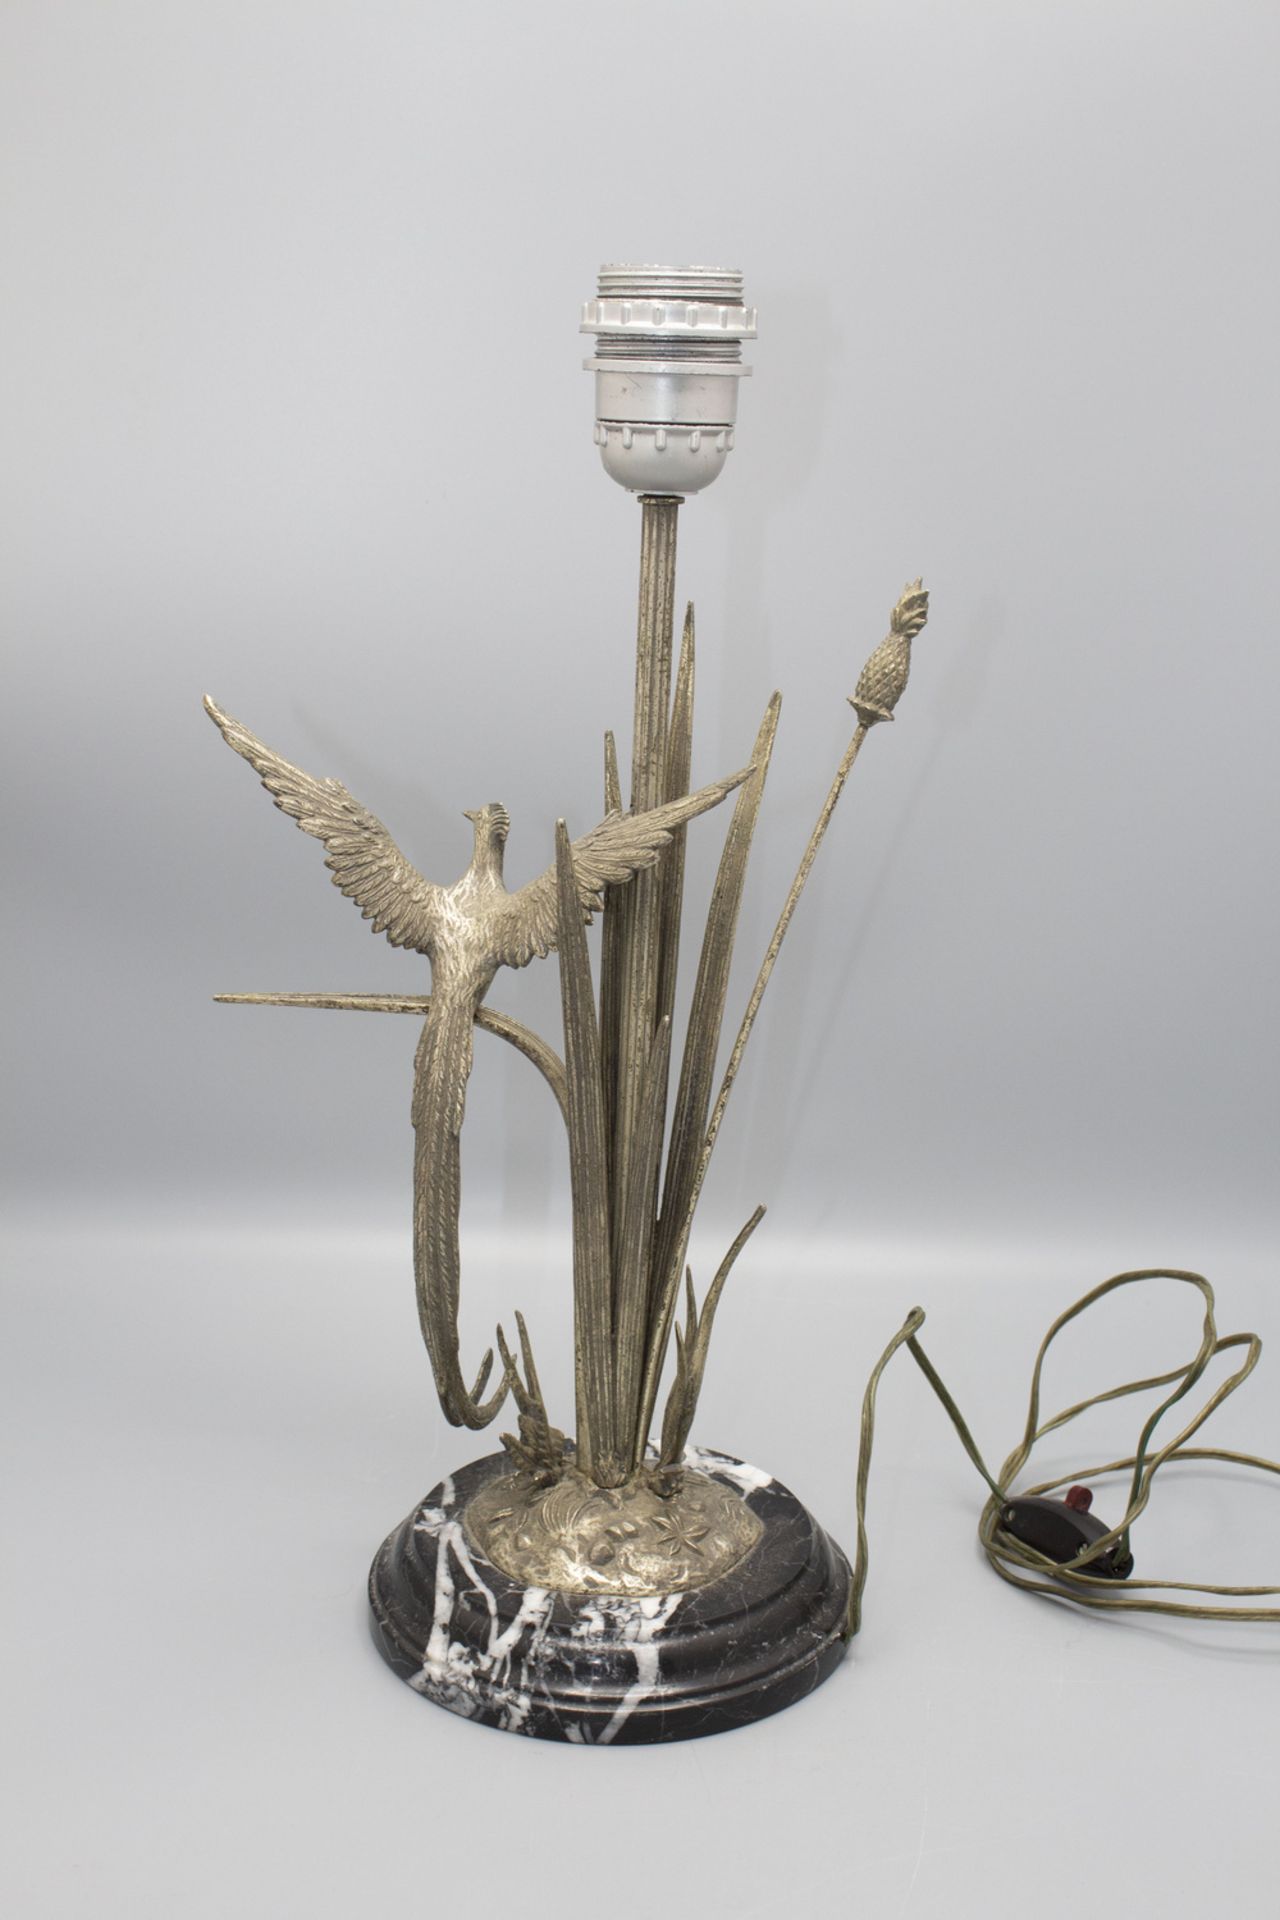 Tischlampe mit Schilf und Paradiesvogel / A desk lamp with reed and a bird of paradise, S. ... - Image 3 of 6